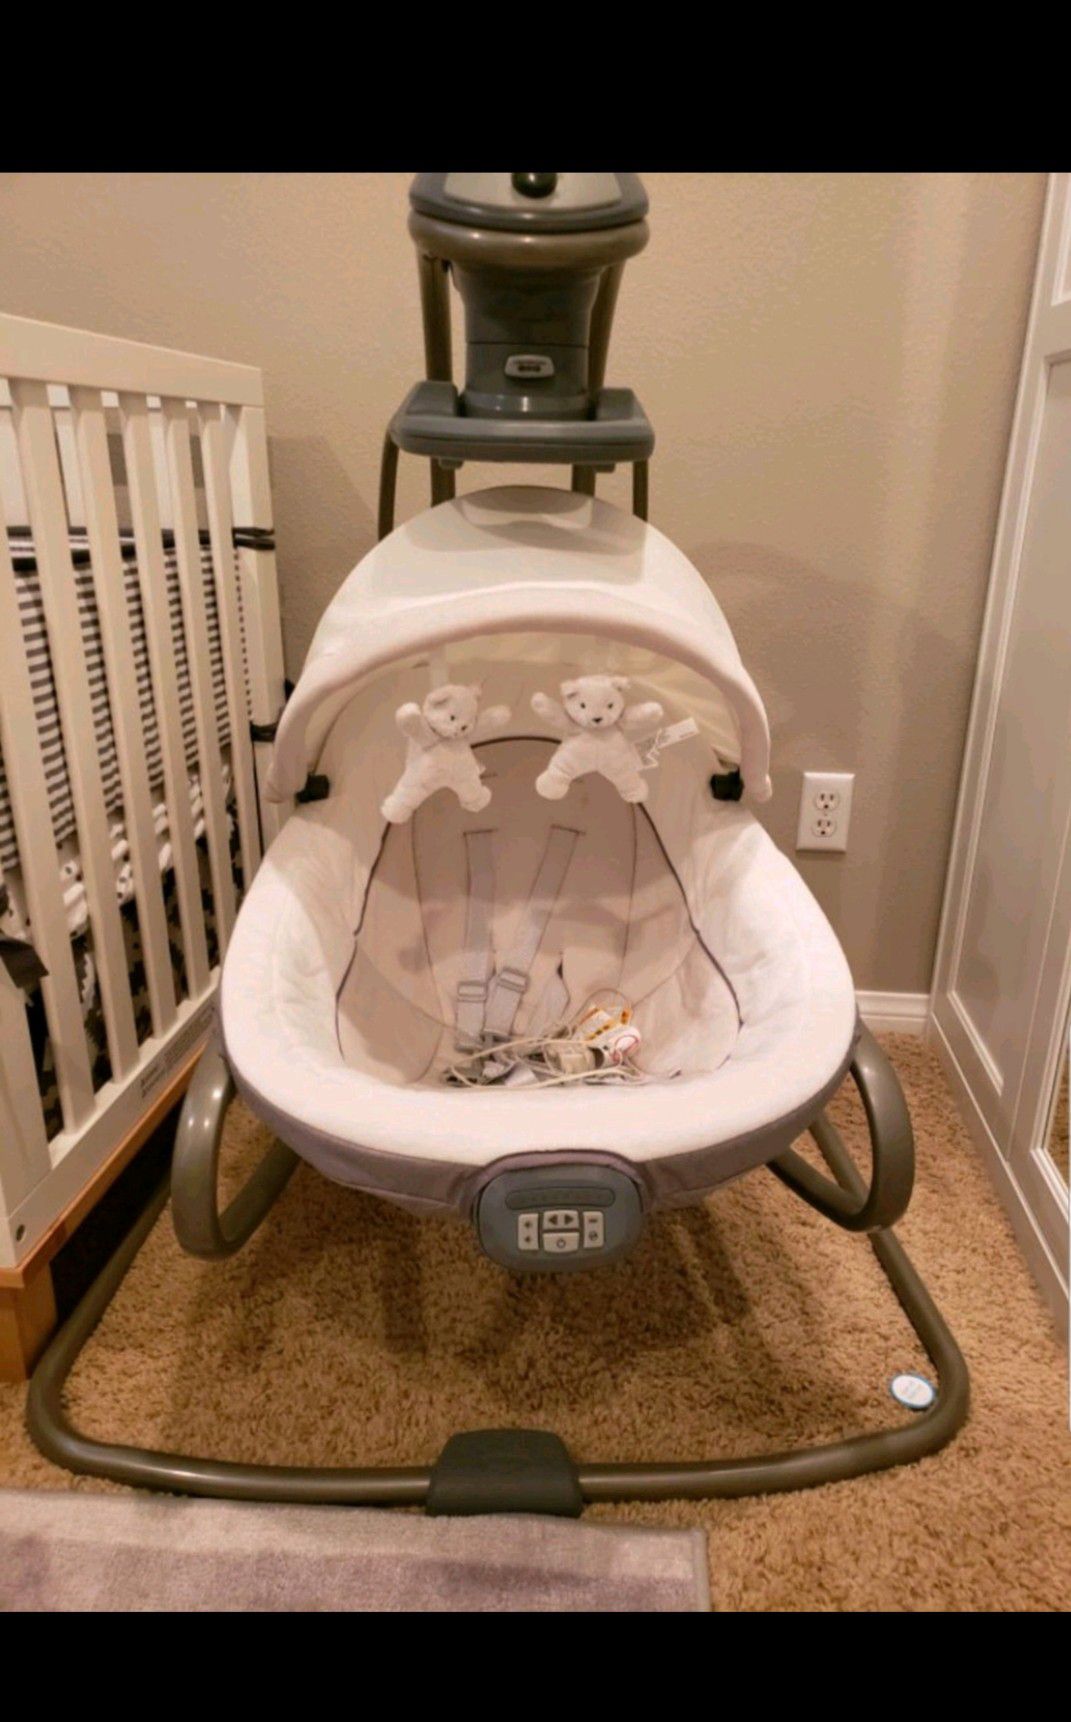 Graco duet oasis soothing baby swing *NEW*